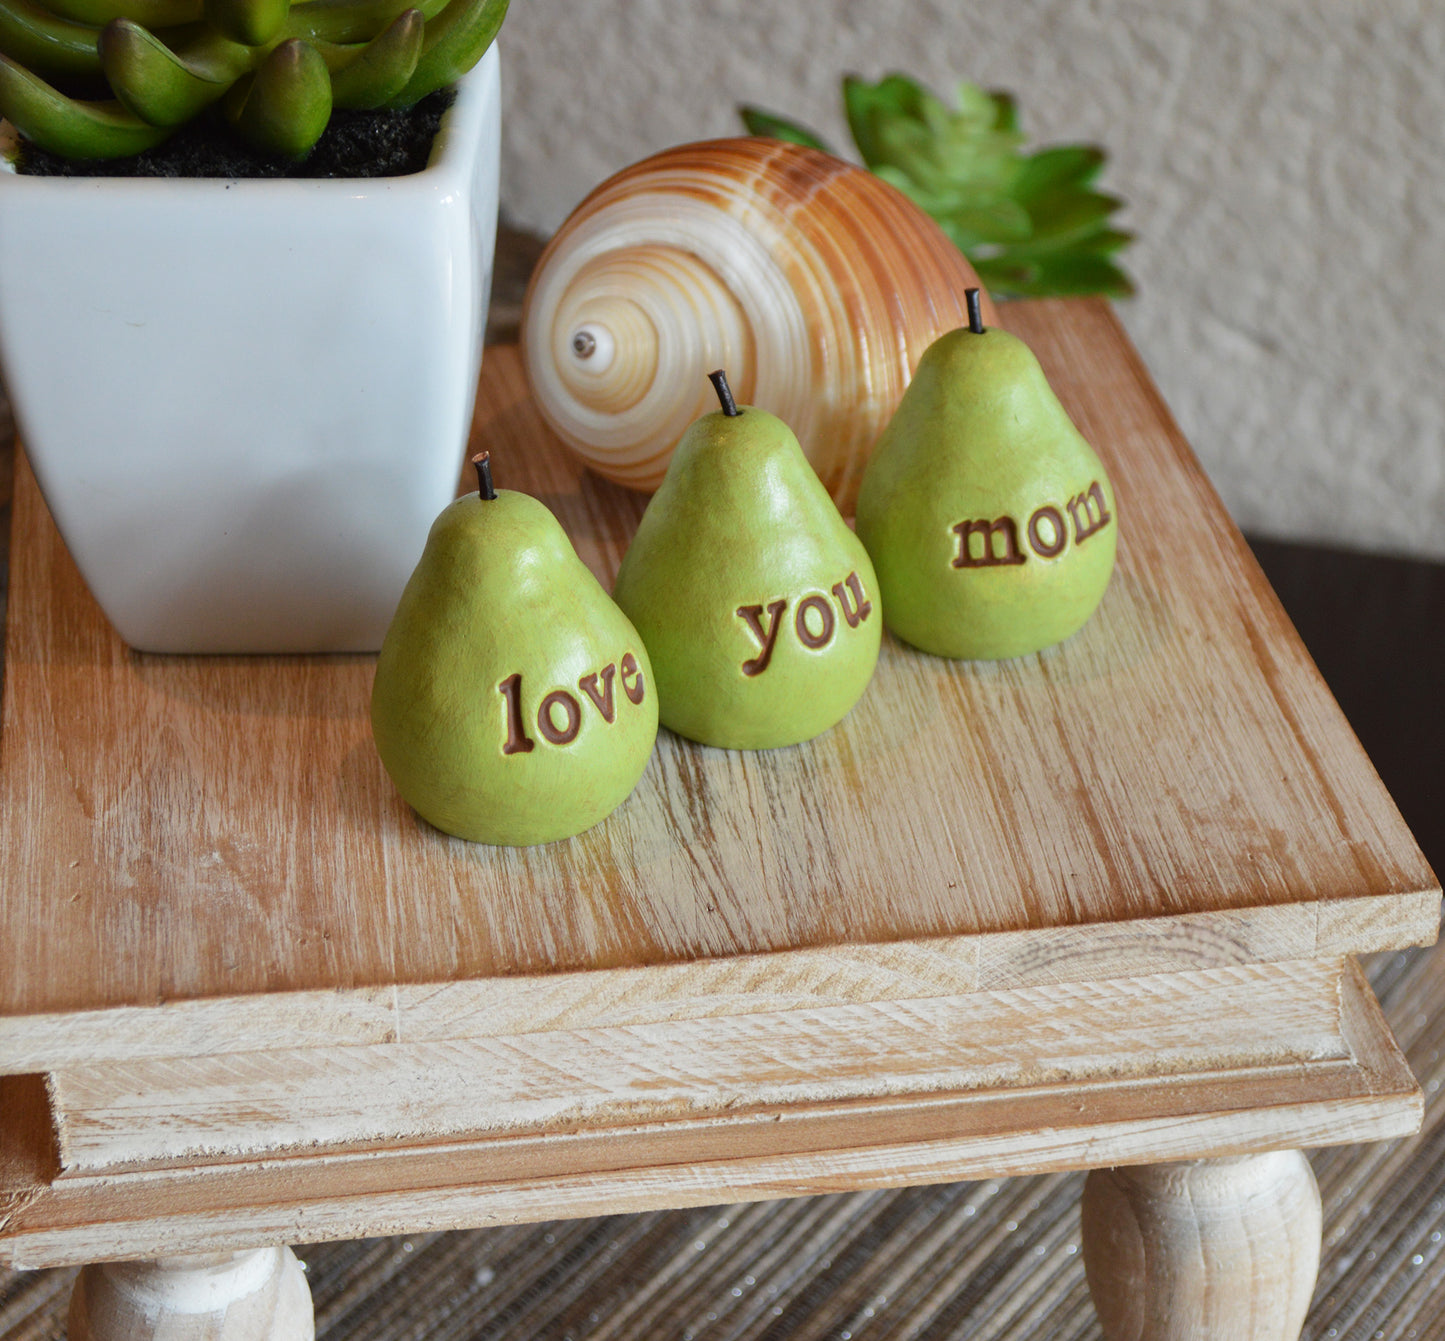 Gift for mom / Mother's Day gift for mothers / 3 green love you mom pears /FREE SHIPPING